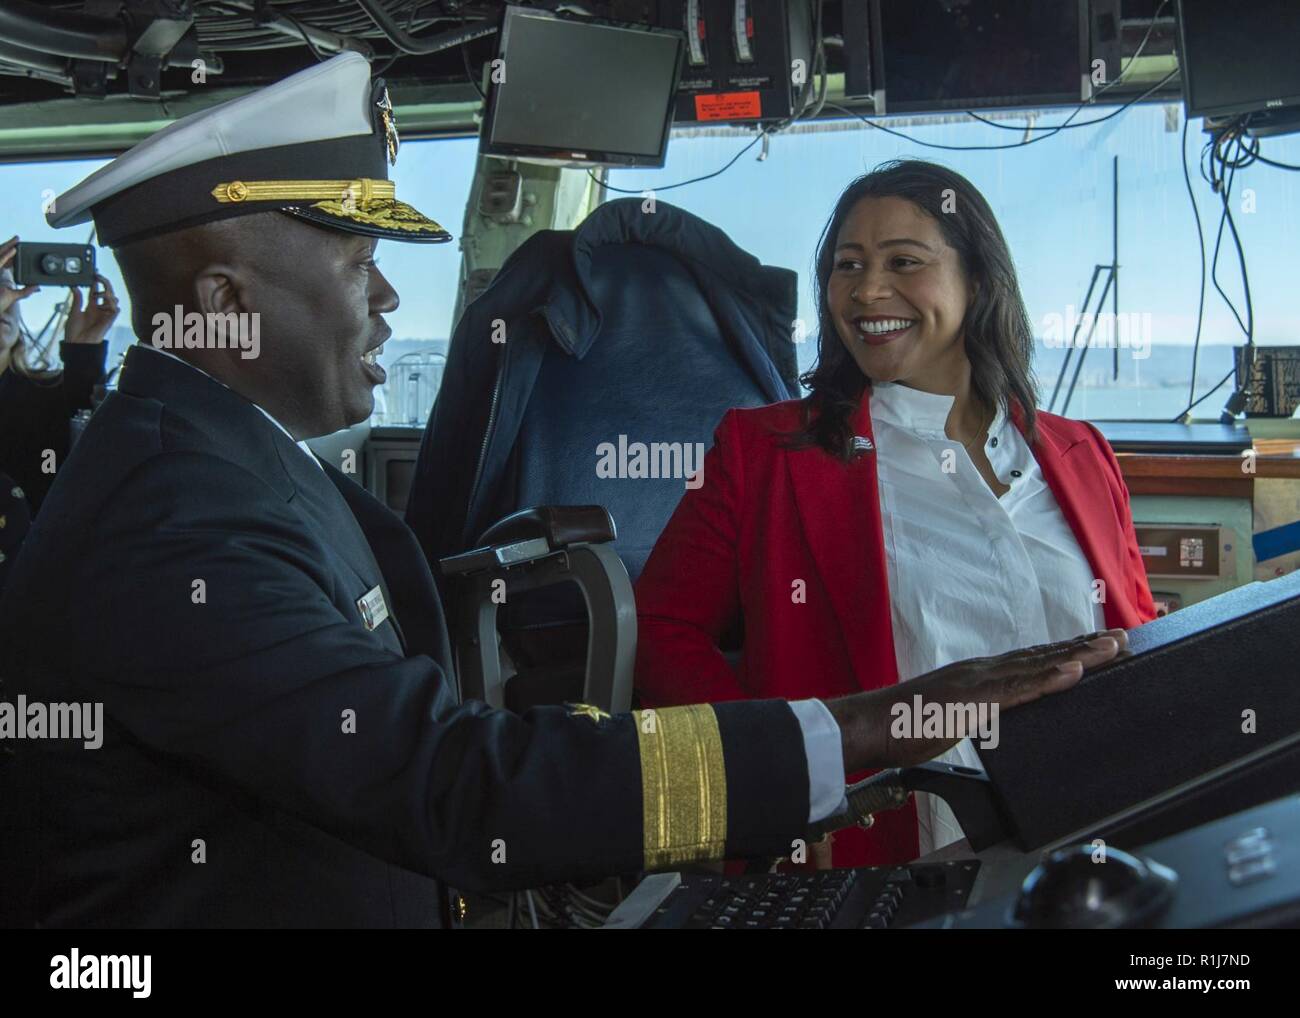 SAN FRANCISCO (Oct. 7, 2018) Rear Adm. Cedric Pringle, left, commander, Expeditionary Strike Group (ESG) 3, describes bridge operations to London Breed, mayor of San Francisco, during a tour of the amphibious assault ship USS Bonhomme Richard (LHD 6) as part of San Francisco Fleet Week 2018. San Francisco Fleet Week is an opportunity for the American public to meet their Navy, Marine Corps and Coast Guard teams and experience America’s sea services. During fleet week, service members participate in various community service events, showcase capabilities and equipment to the community, and enjo Stock Photo